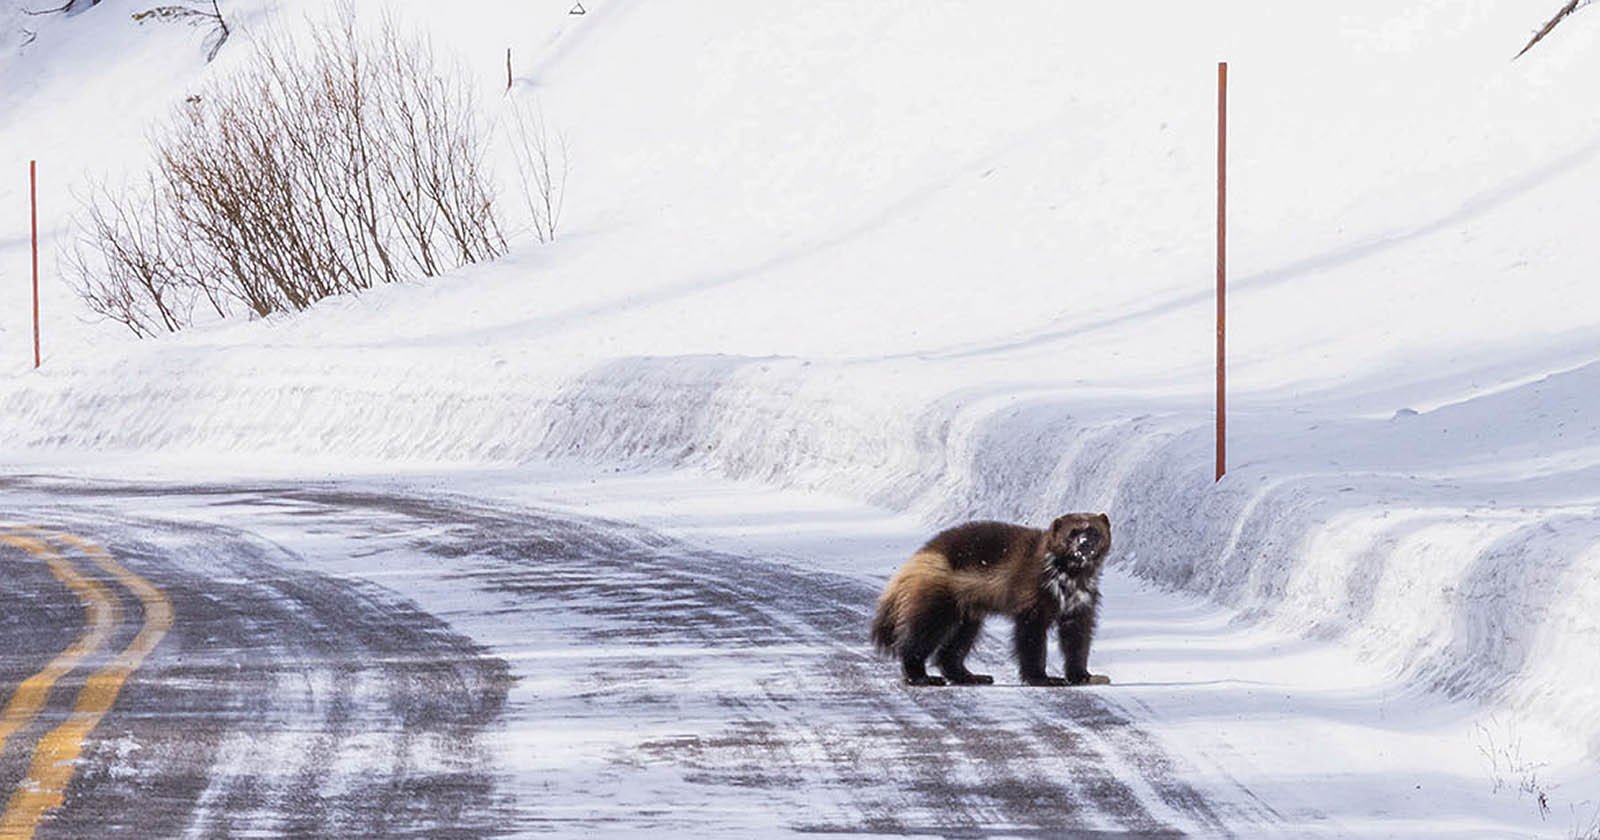 Ultra-Rare Wolverine Photographed in Yellowstone